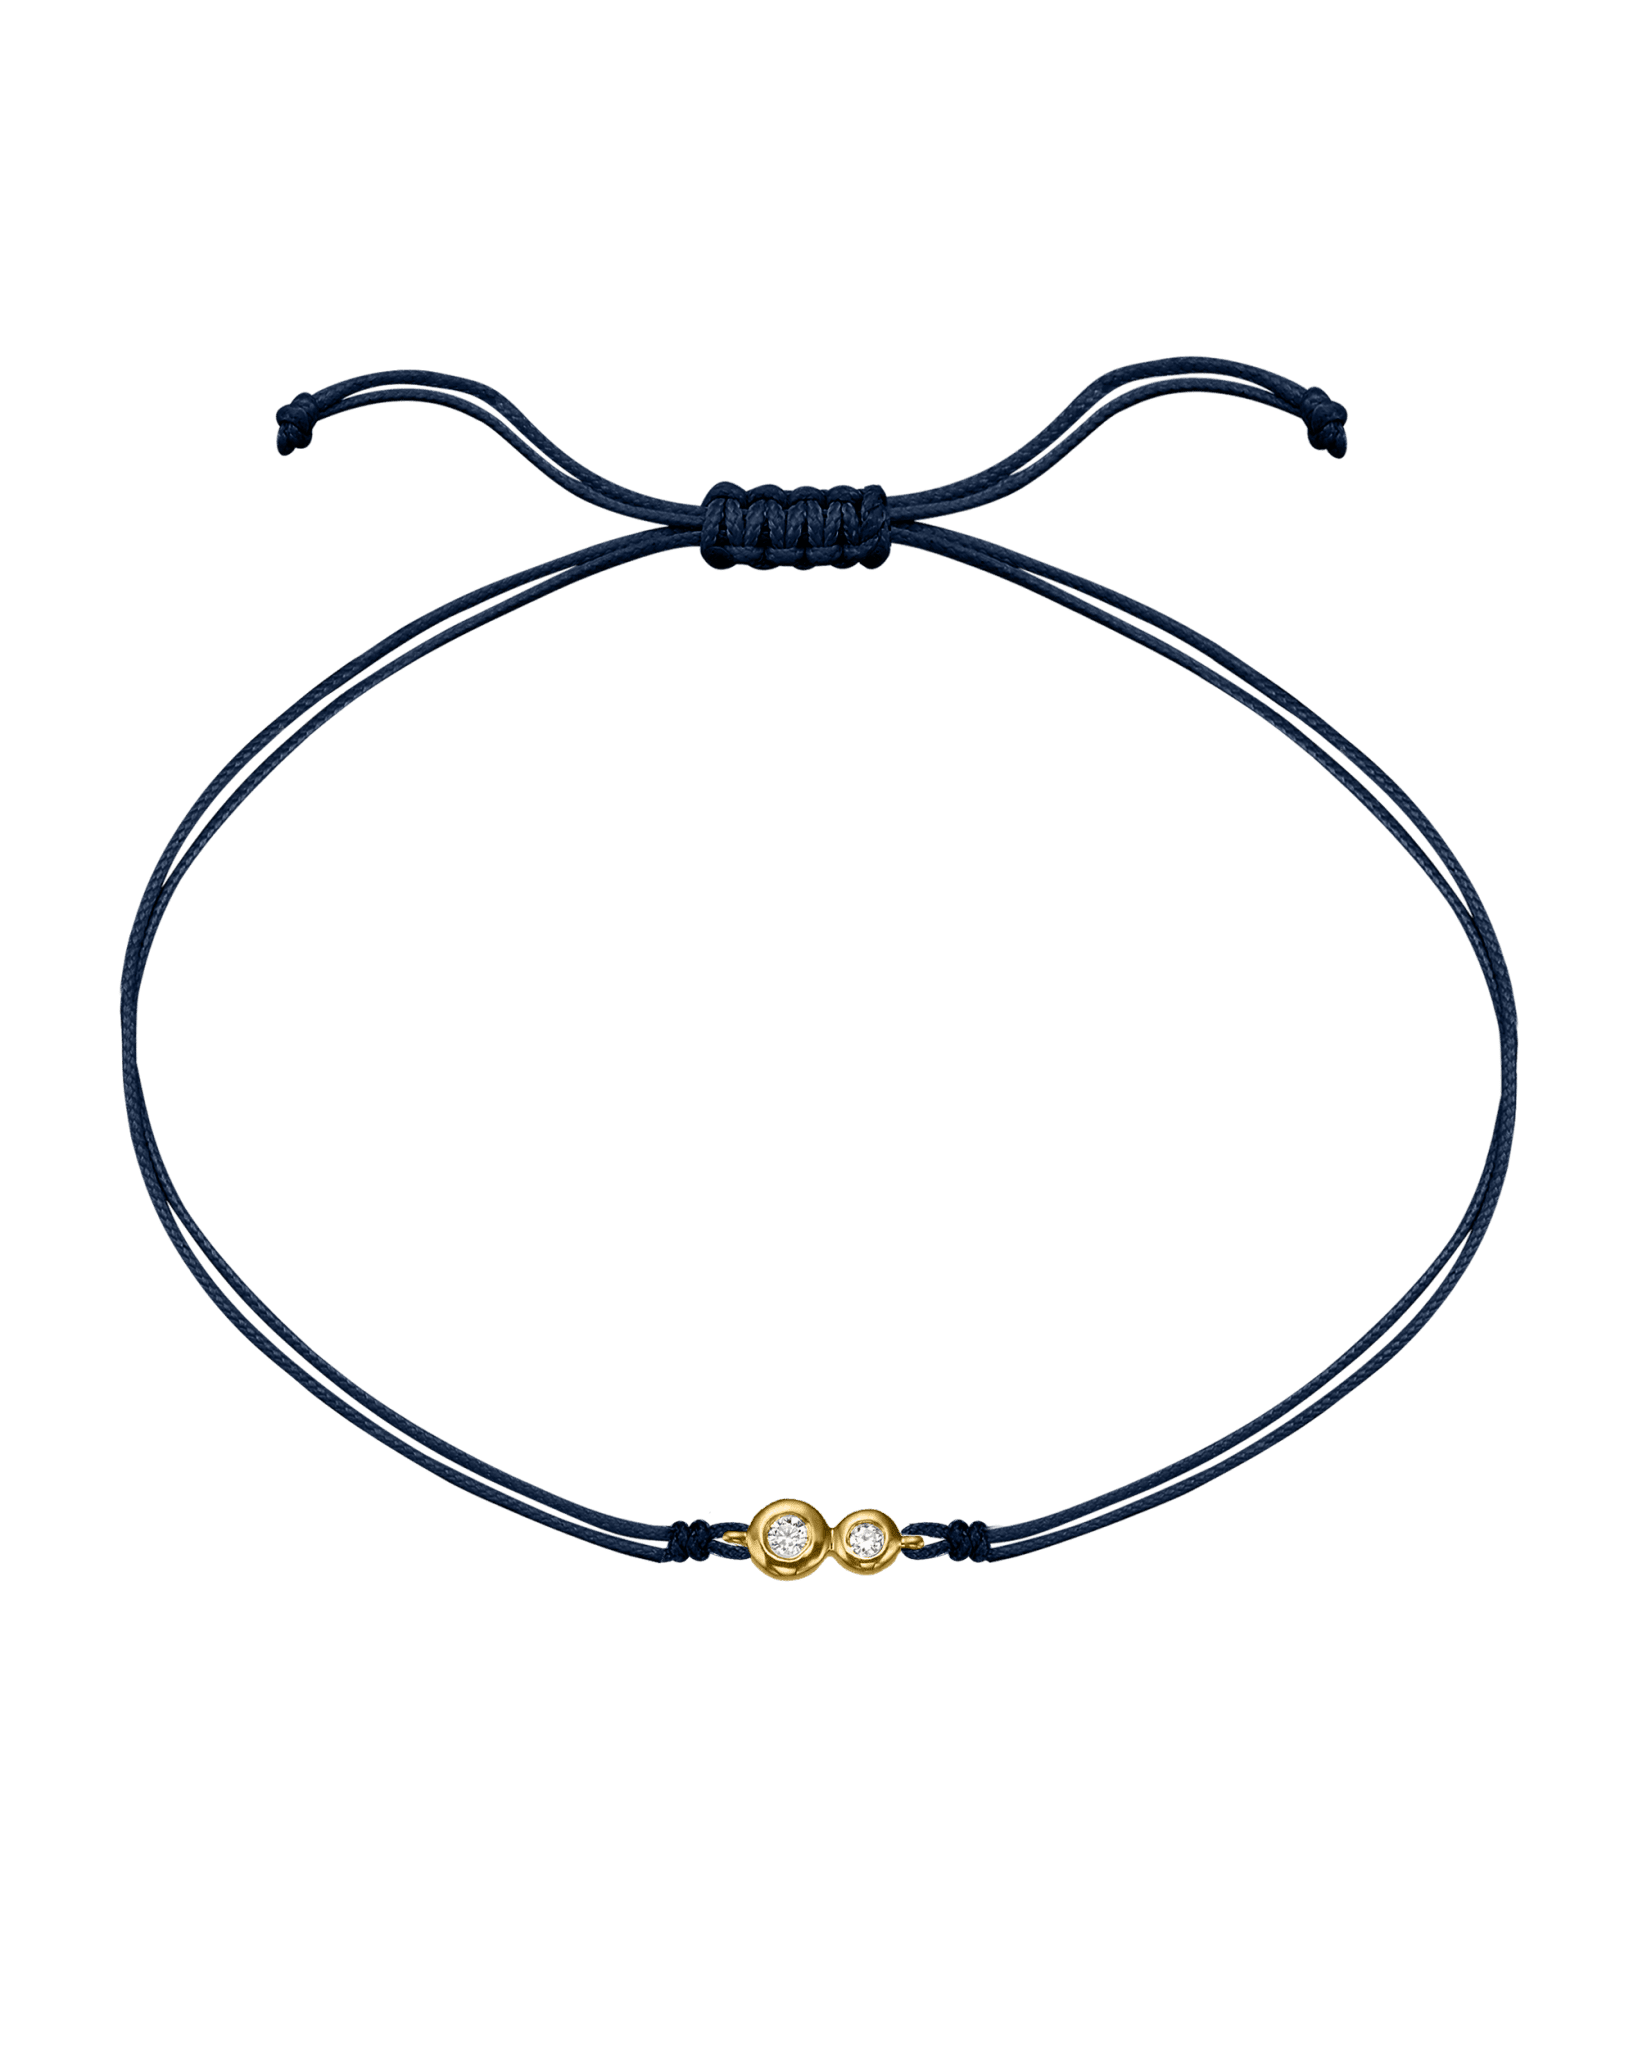 The Two of us Diamond String of love - 14K Yellow Gold Bracelet 14K Solid Gold Navy Blue 